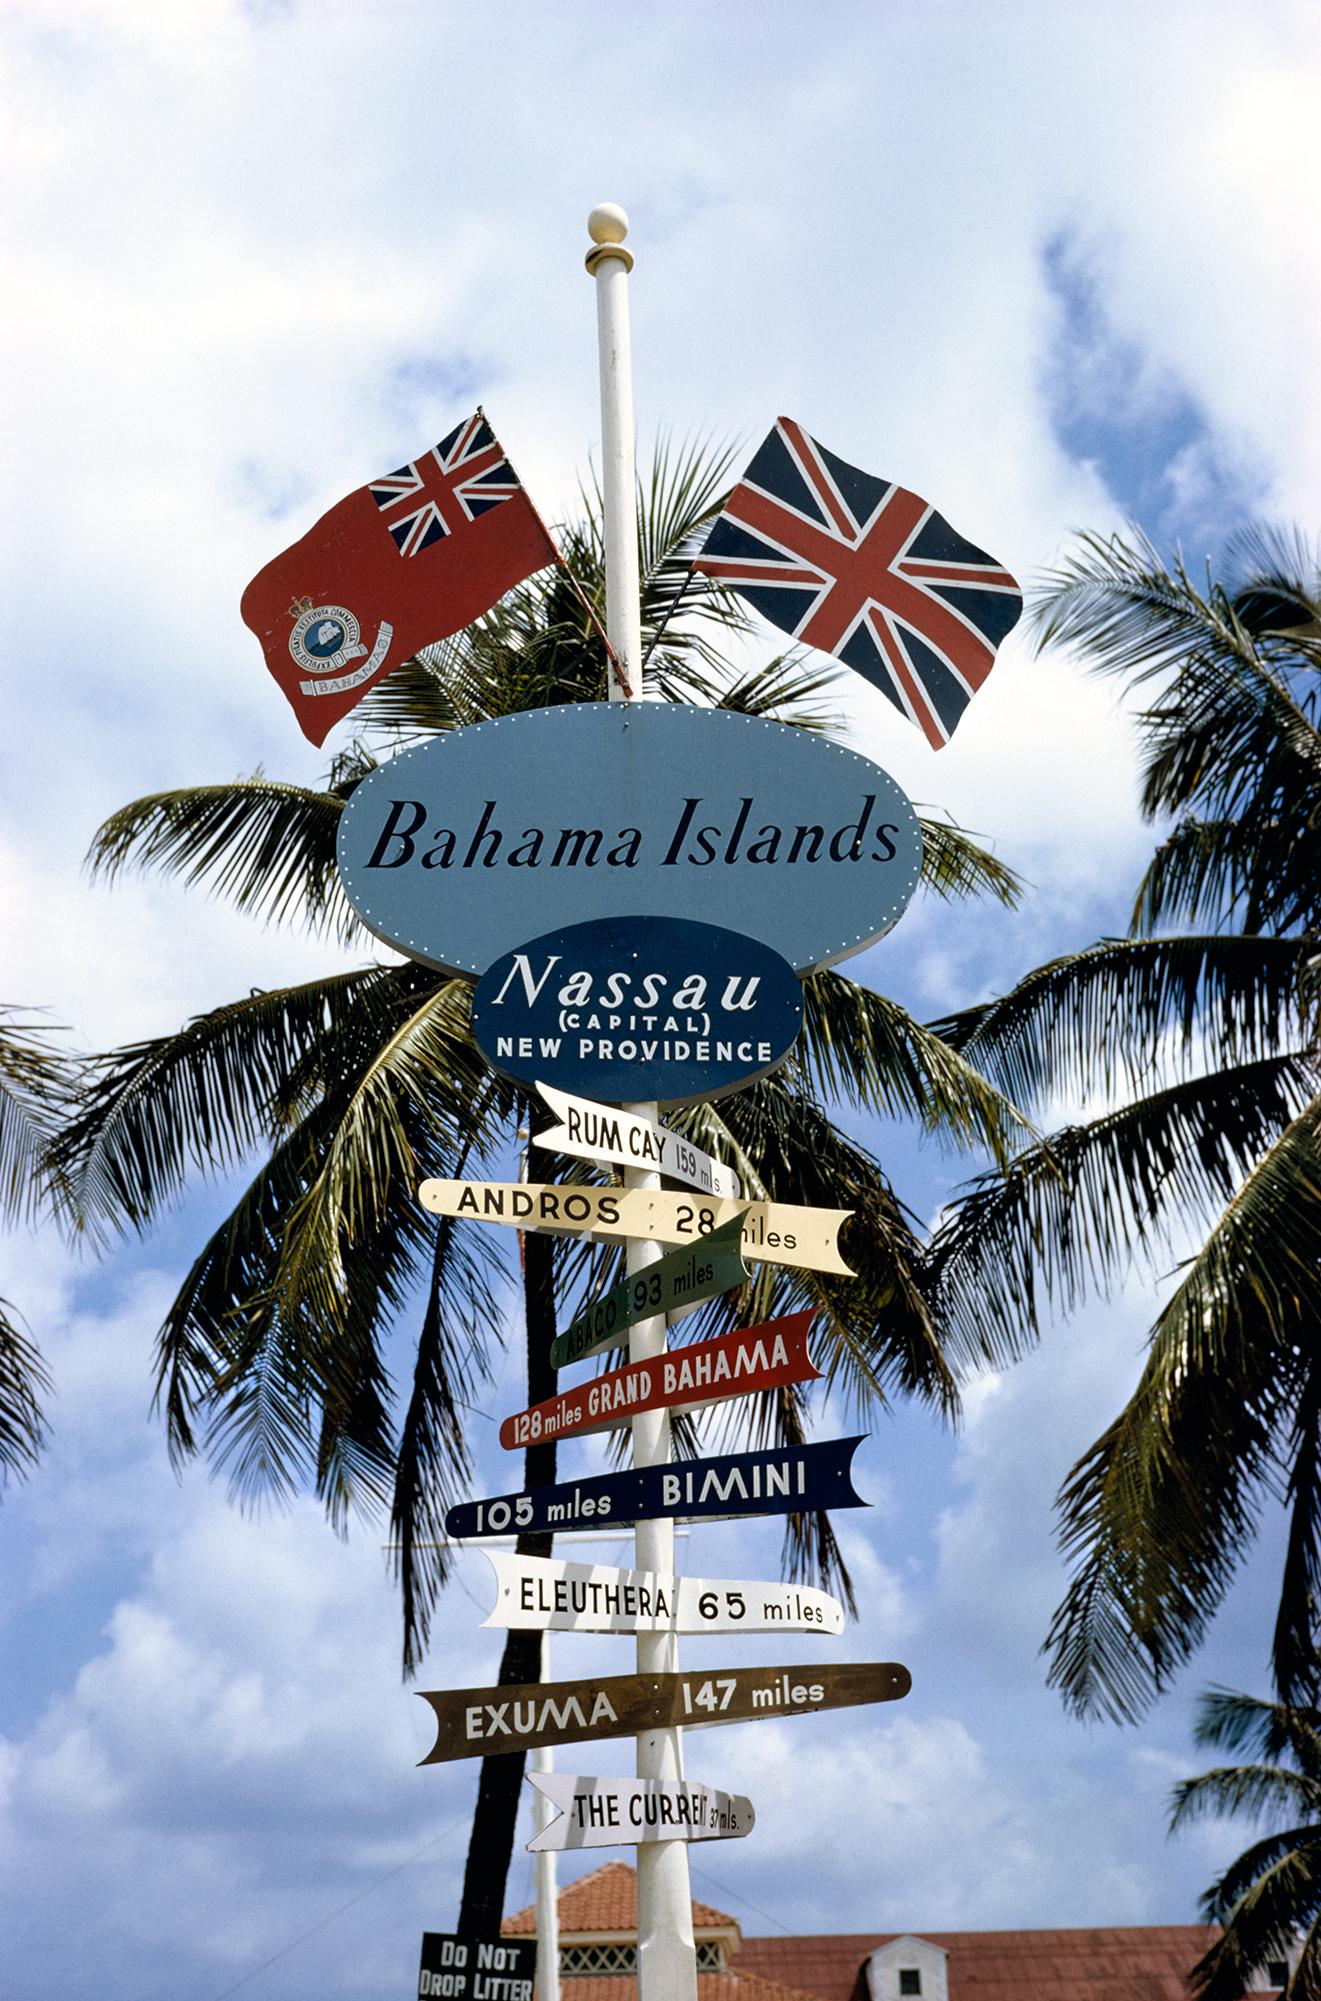 Slim Aarons
Bahamas Signpost
1964
C print
Estate stamped and hand numbered edition of 150 with certificate of authenticity from the estate.   

A signpost in Nassau points the way to Rum Cay, Andros, Abaco, Grand Bahama, Bimini, Eleuthera, Exuma and